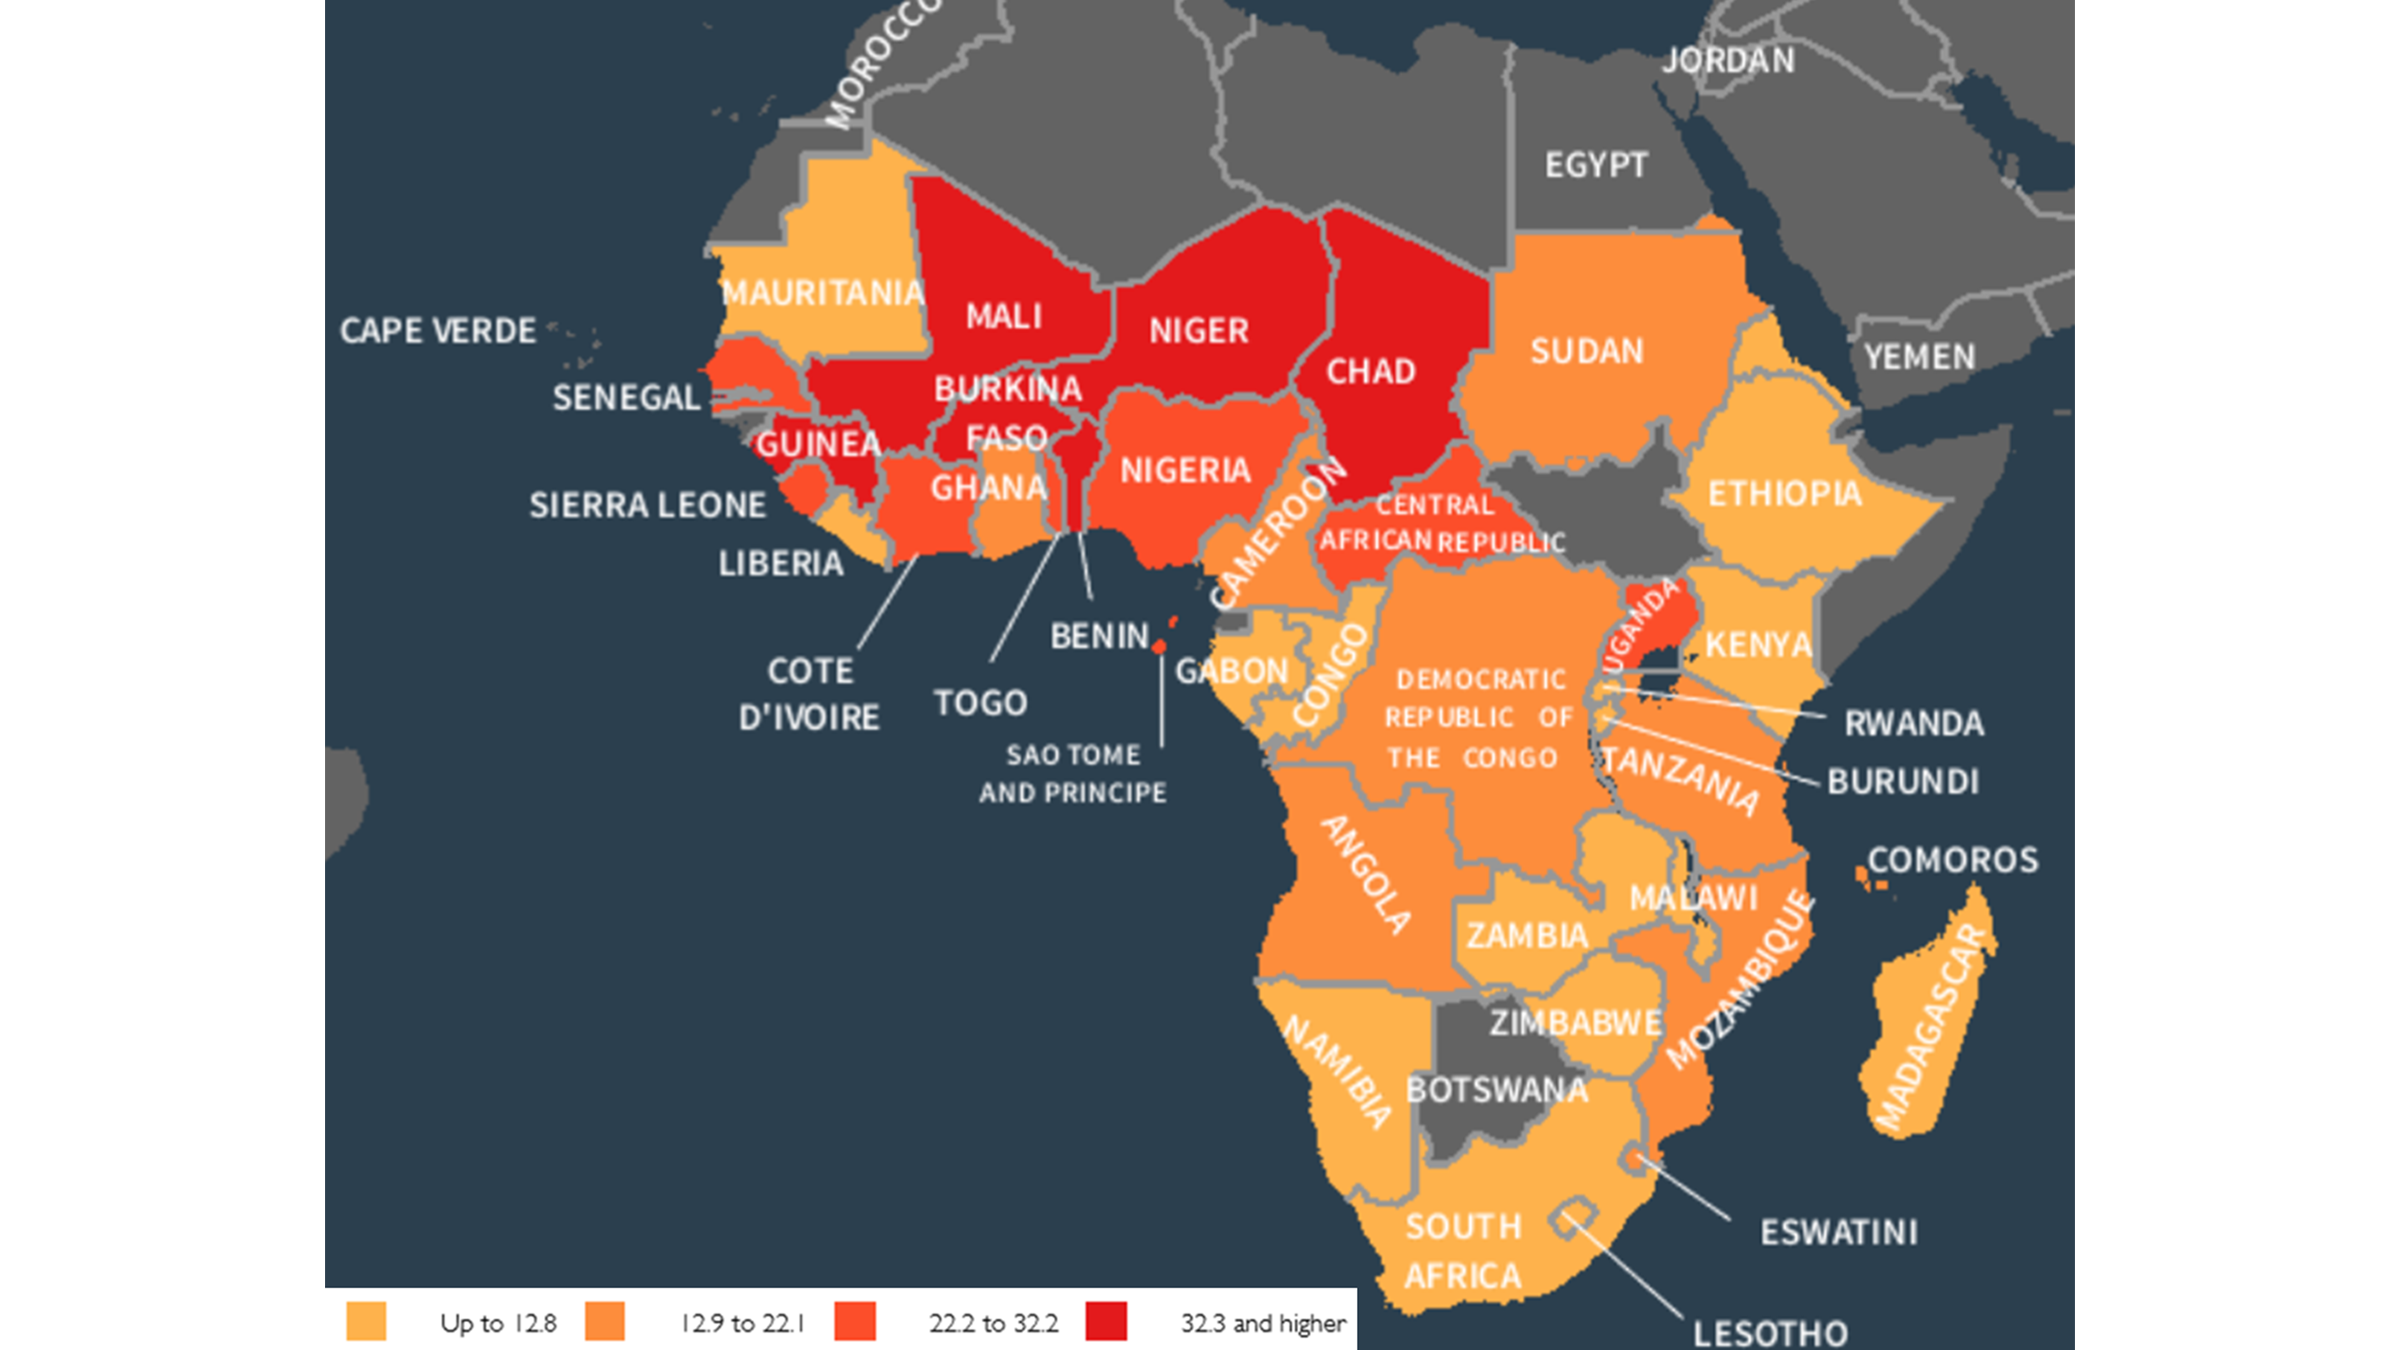 A map of Africa shows the individual countries and the Share of Women with One or More Co-Wives.